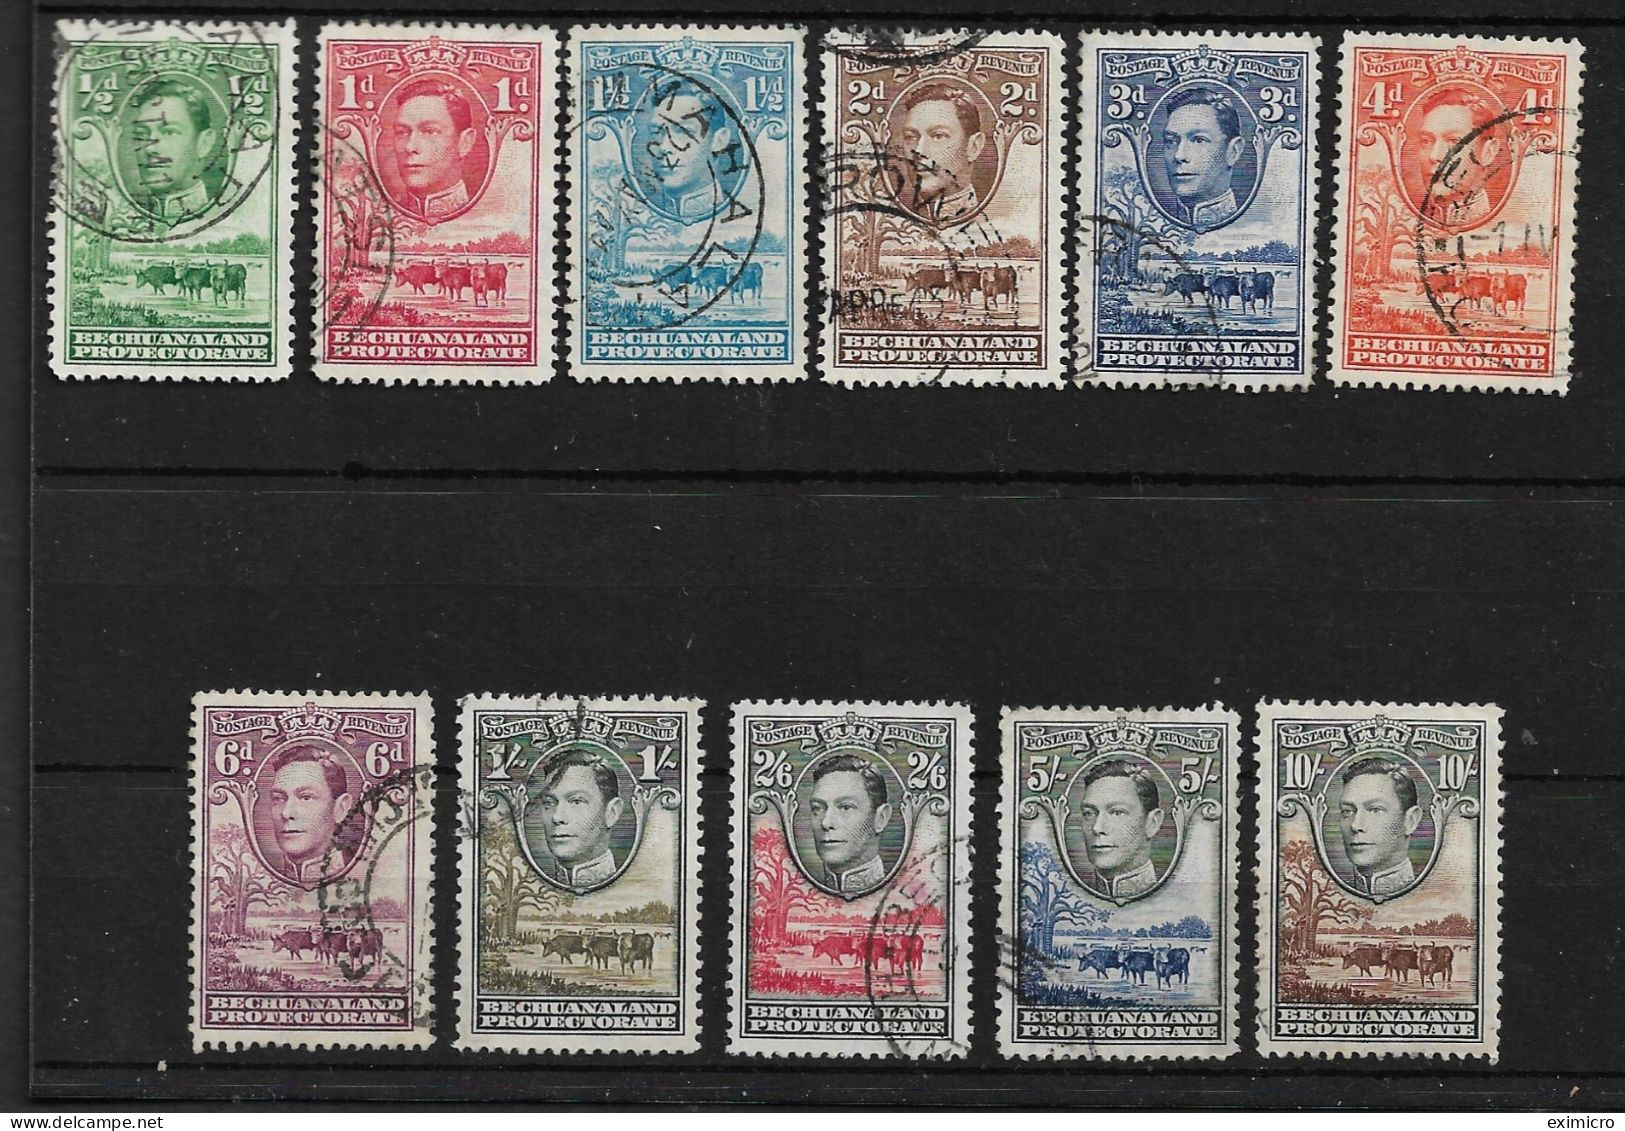 BECHUANALAND 1938 - 1952 SET SG 118/128 FINE USED Cat £110 - 1885-1964 Bechuanaland Protectorate